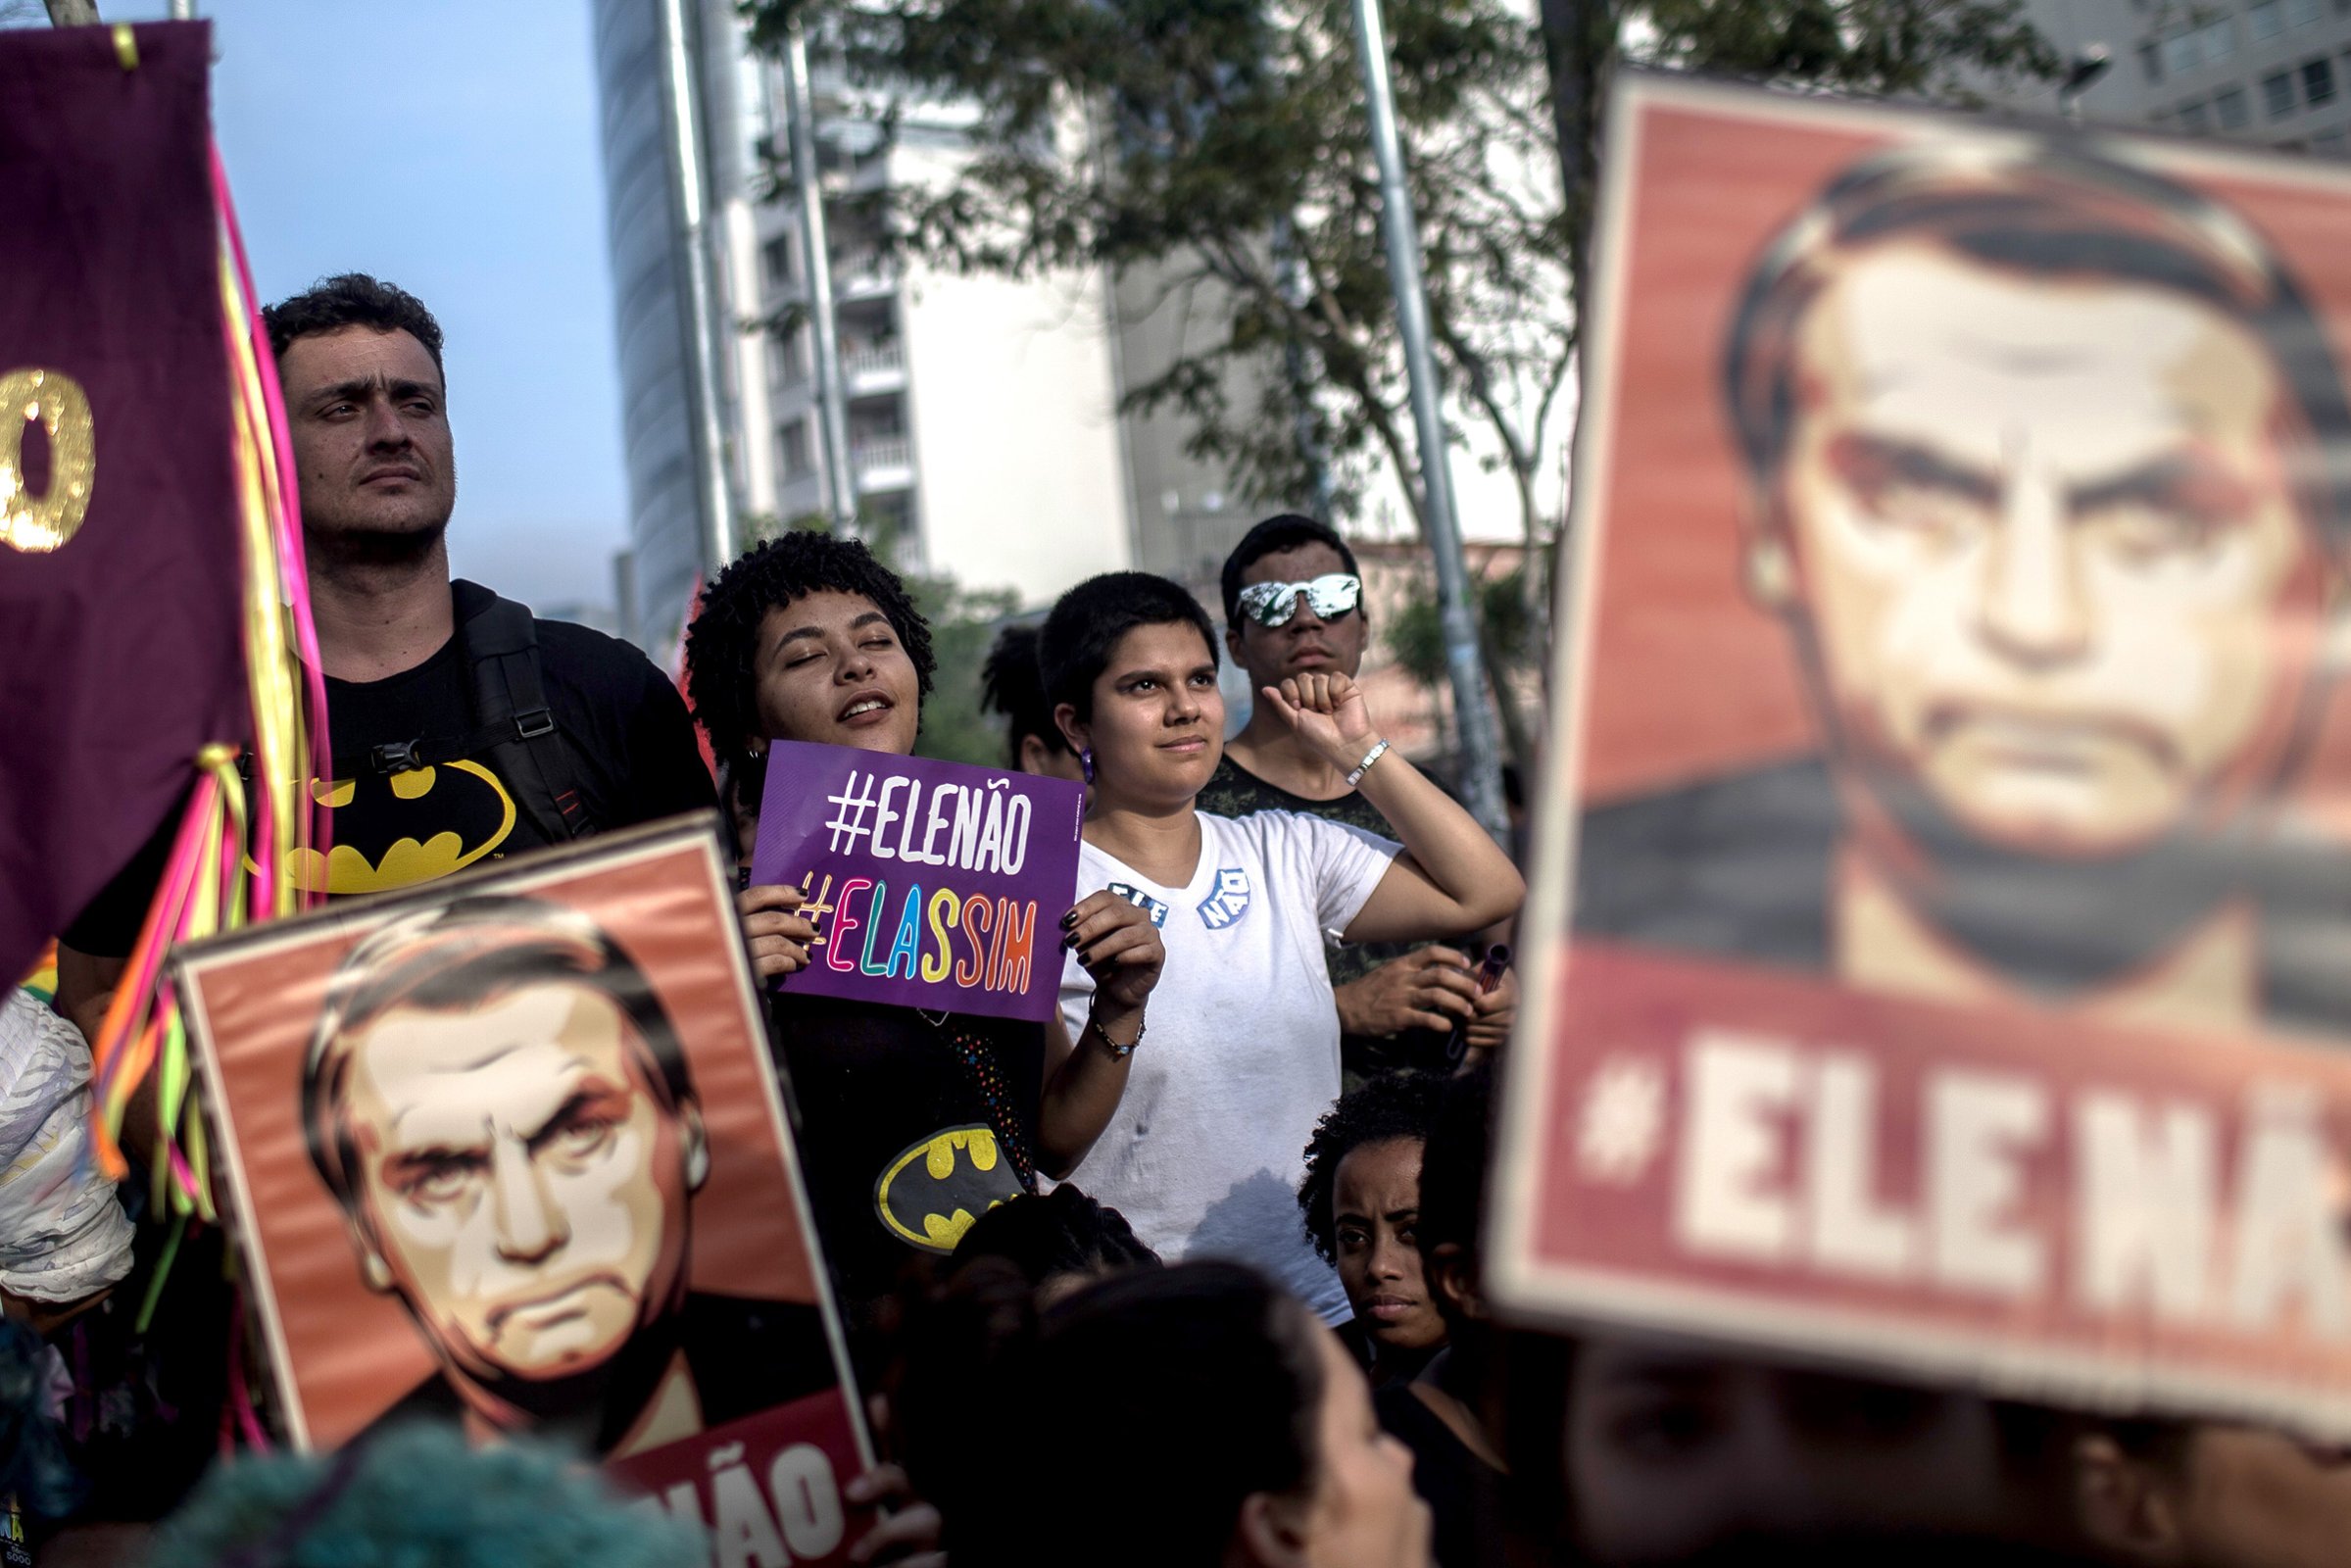 Protesters carry posters against the far-right’s presidential candidate Jair Bolsonaro in Sao Paulo, Brazil on Sept. 29, 2018.